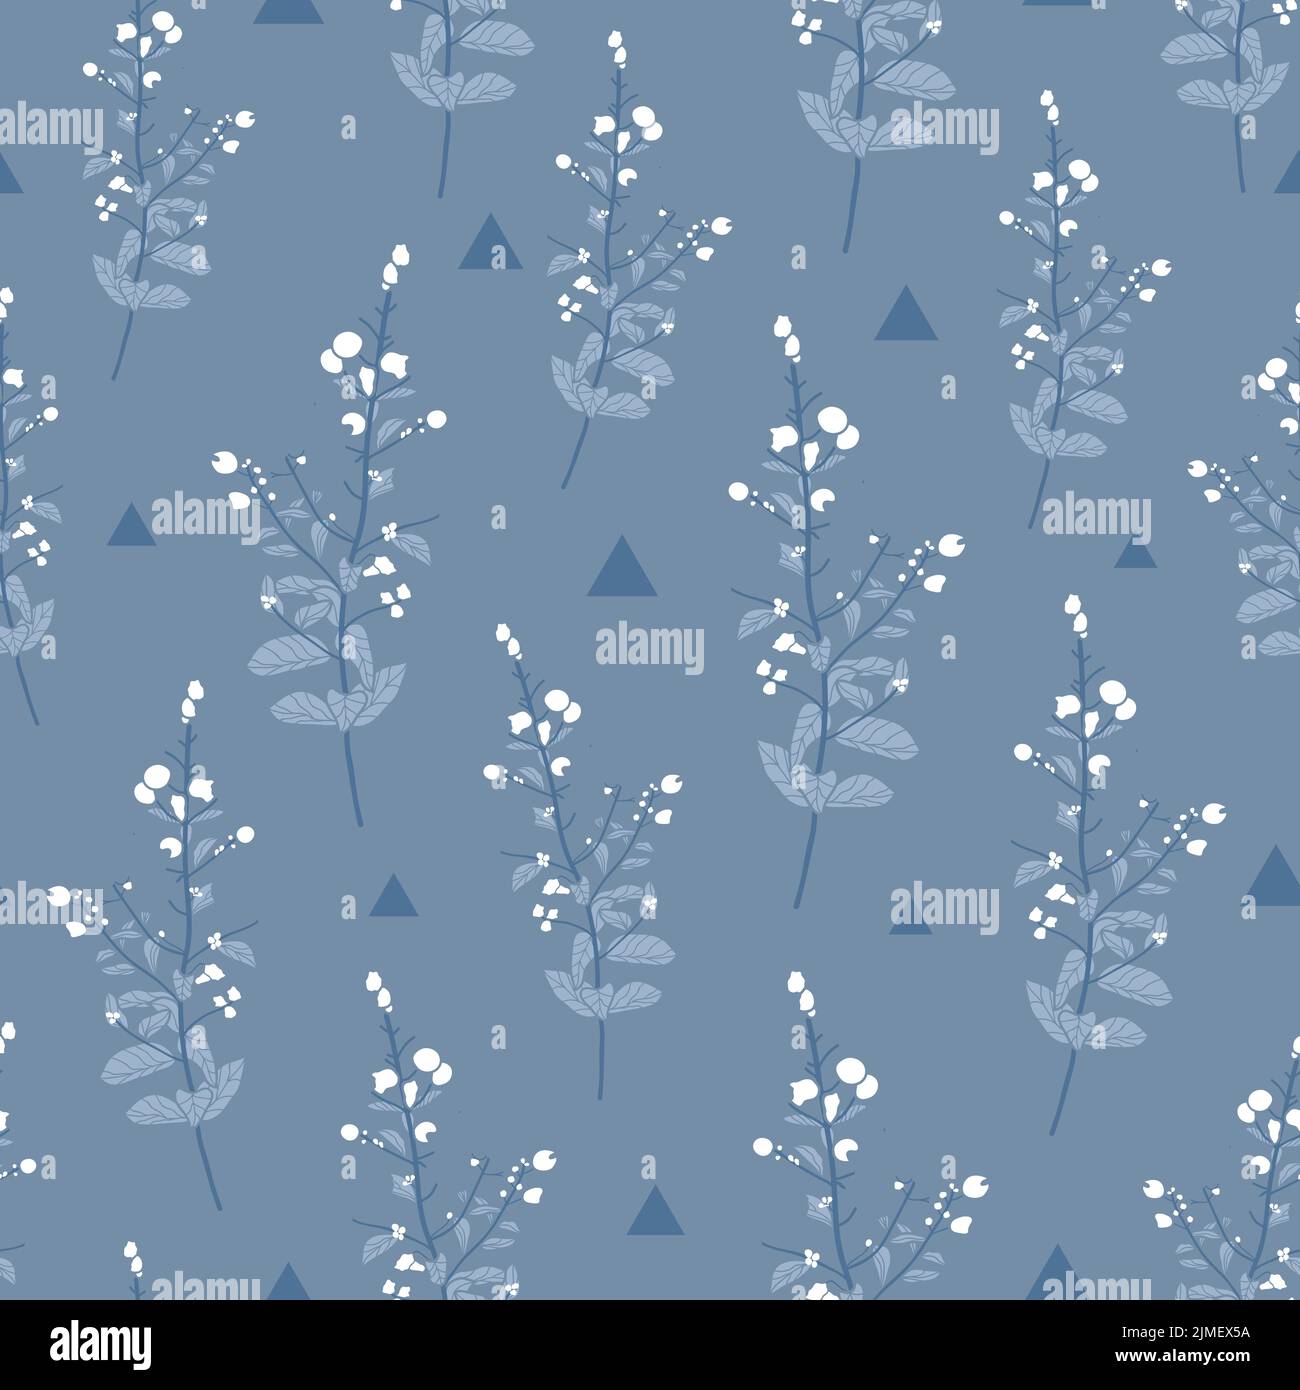 Vector grey blue plants with snow seamless pattern background with hand drawn illustration Stock Vector